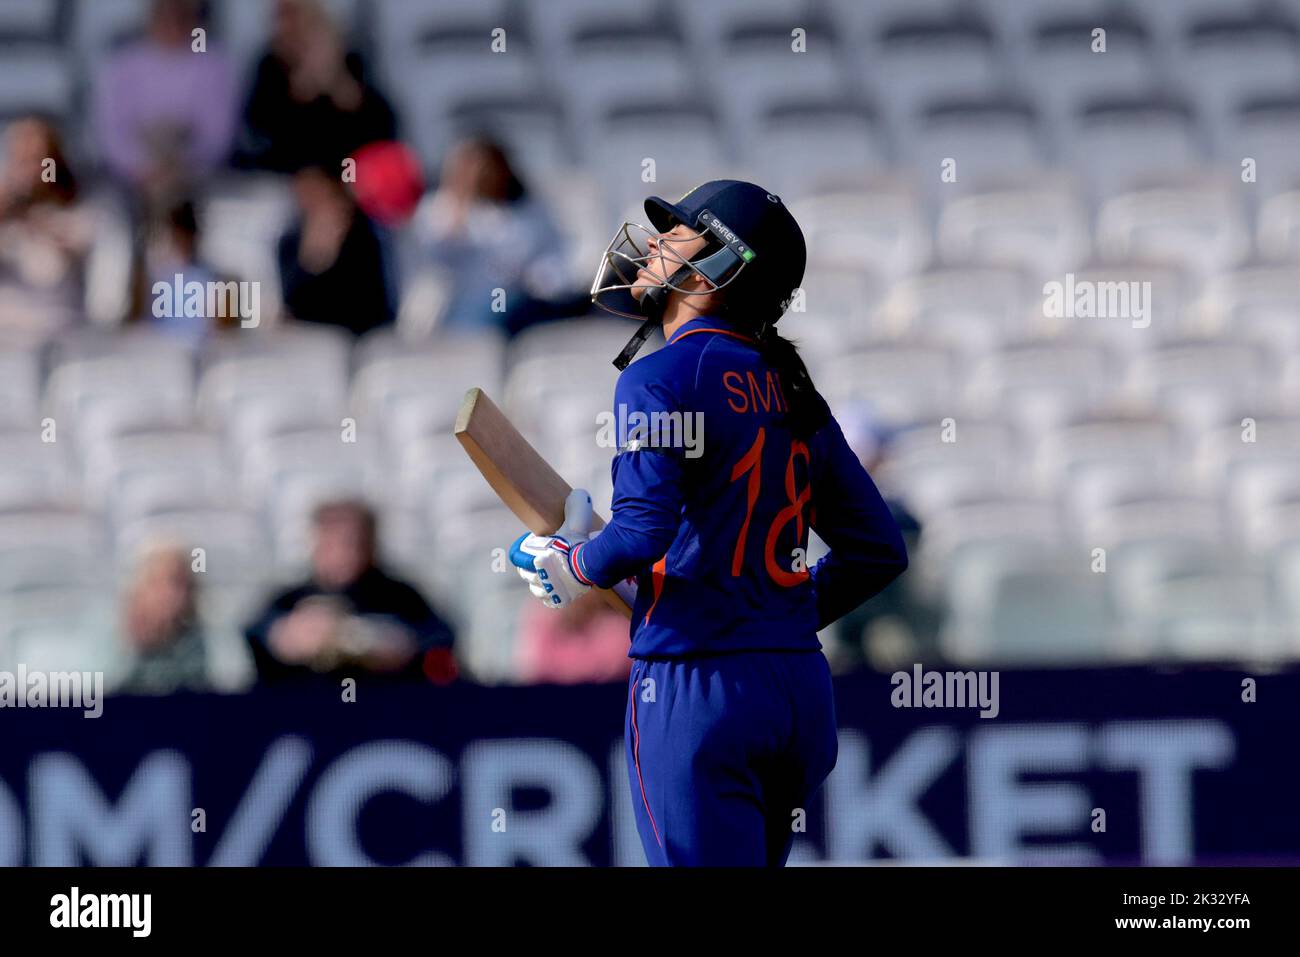 London, UK. 24 September 2022.  India’s Smriti Mandhana gets her fifty as England women take on India in the 3rd Royal London One Day International at Lords. David Rowe/Alamy Live News. Stock Photo